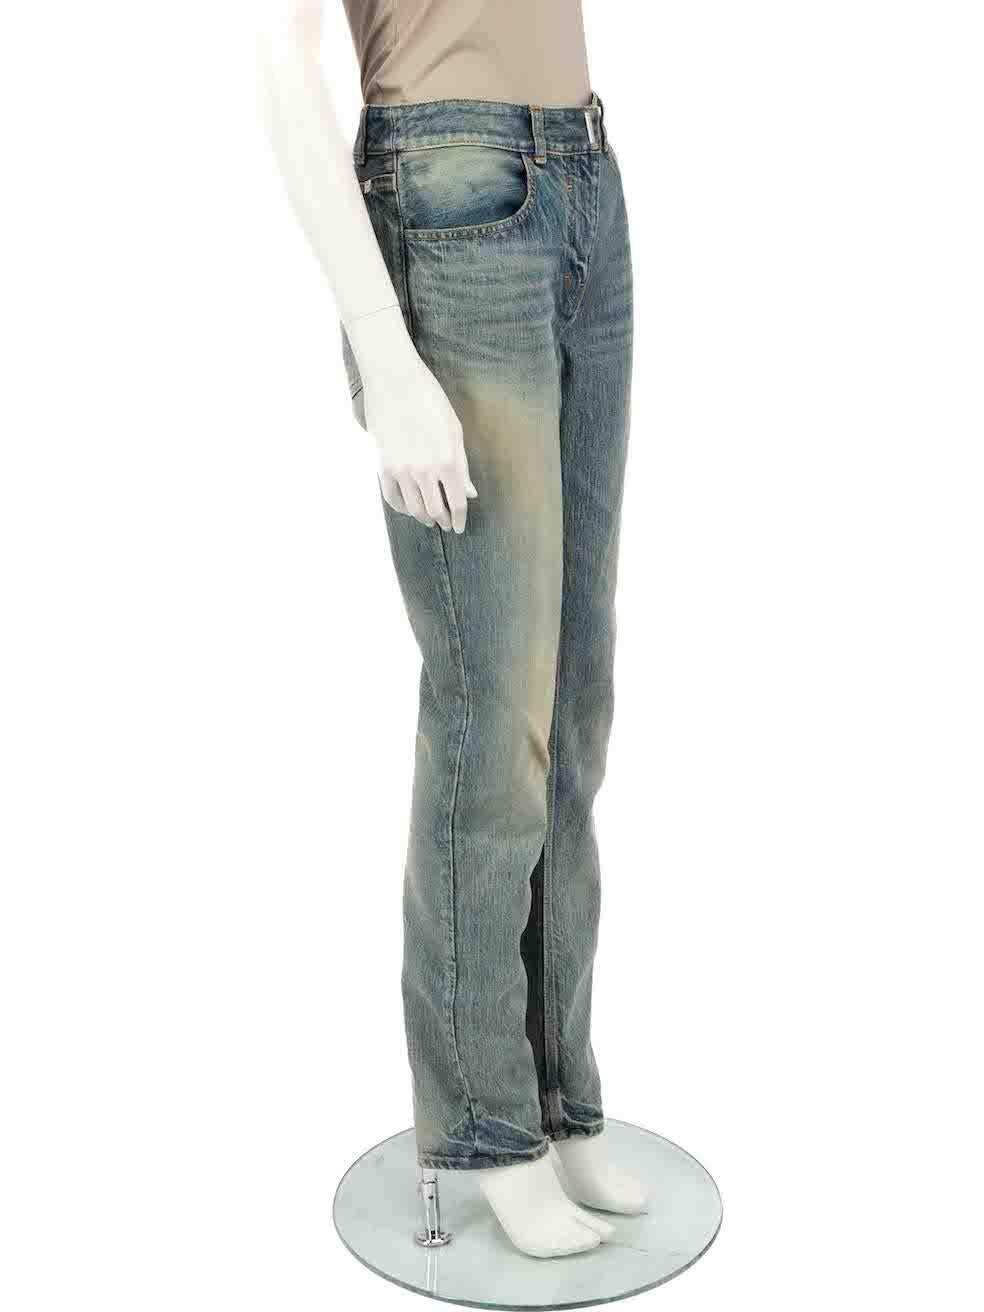 CONDITION is Good. General wear to jeans is evident. Moderate signs of wear to the front and back with discoloured marks - particularly at the cuffs on this used Givenchy designer resale item.
 
Details
Blue
Denim
Jeans
Skinny
High rise
Stone